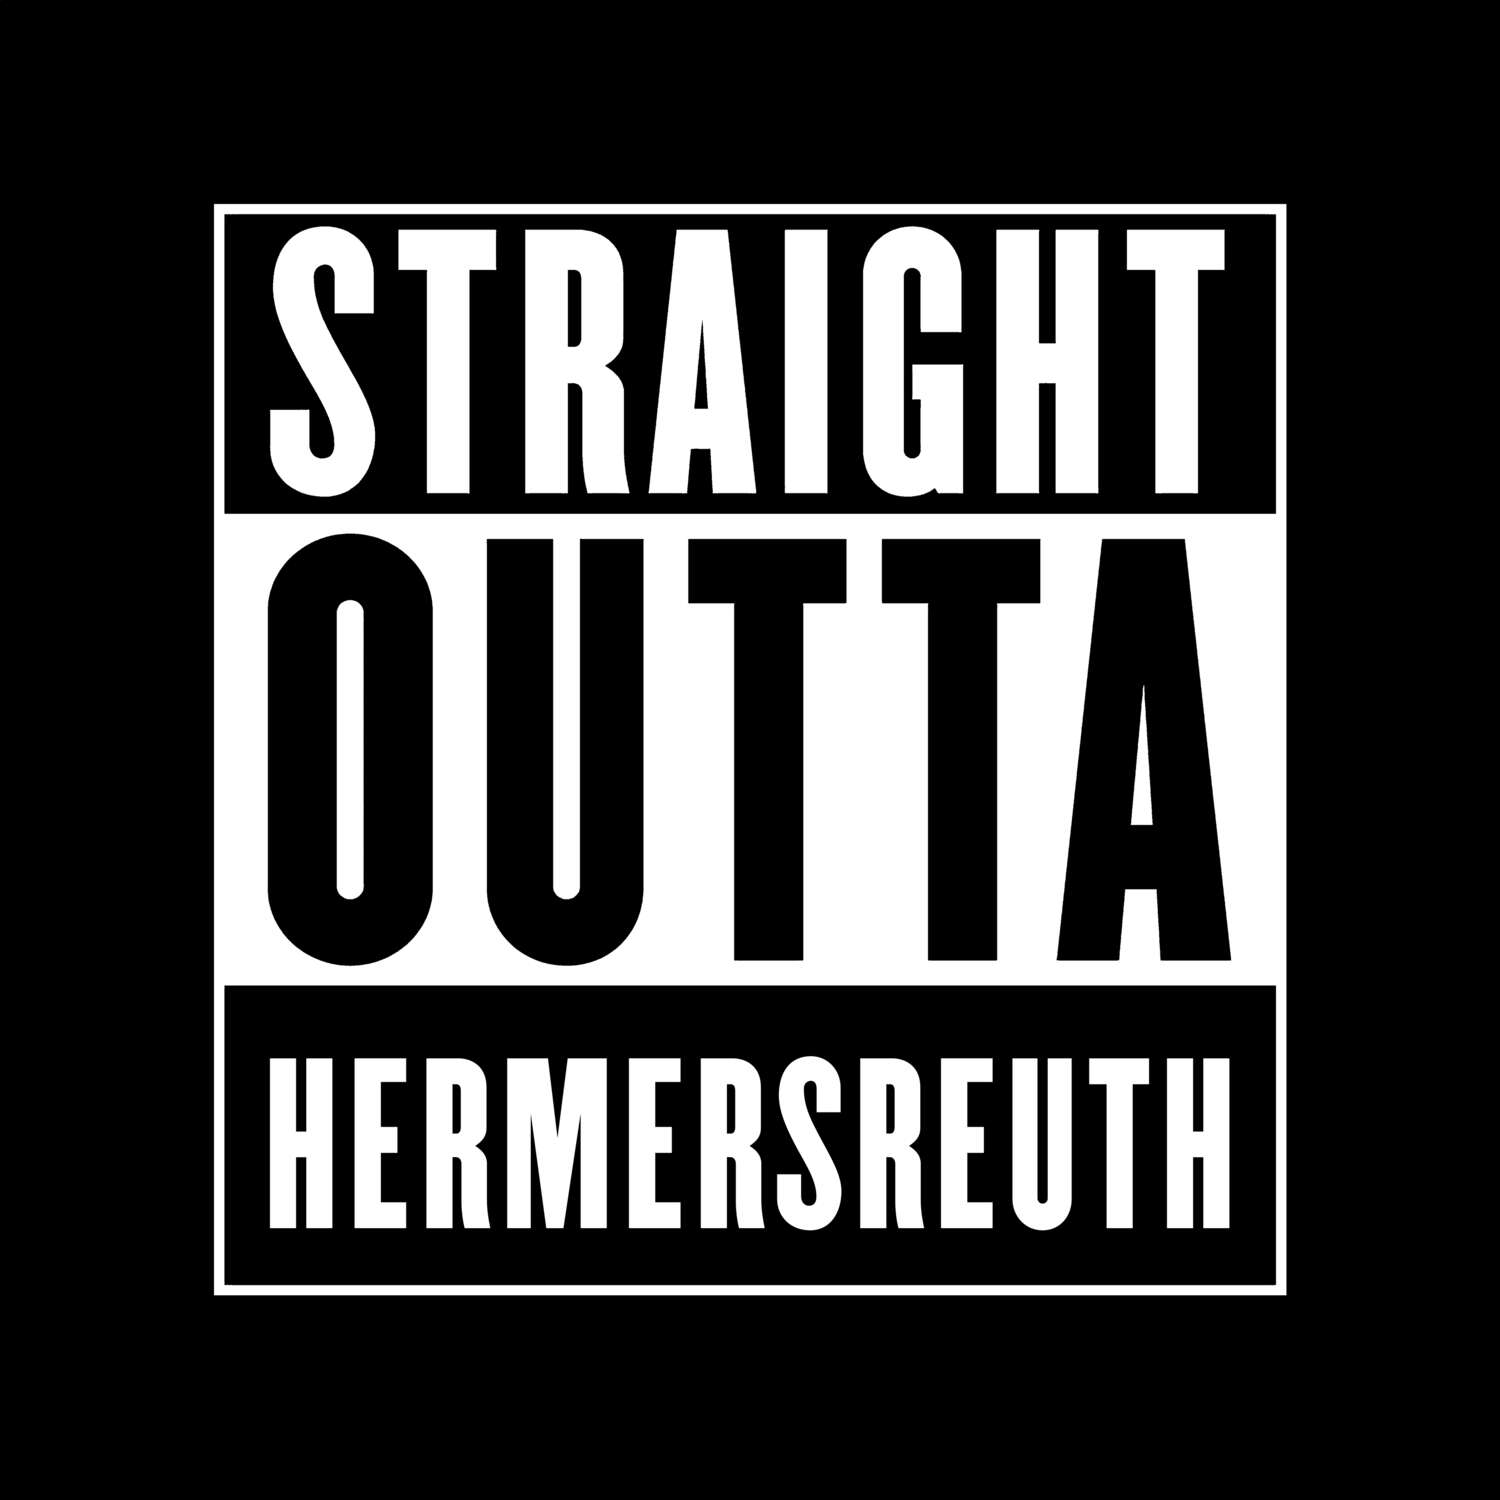 Hermersreuth T-Shirt »Straight Outta«